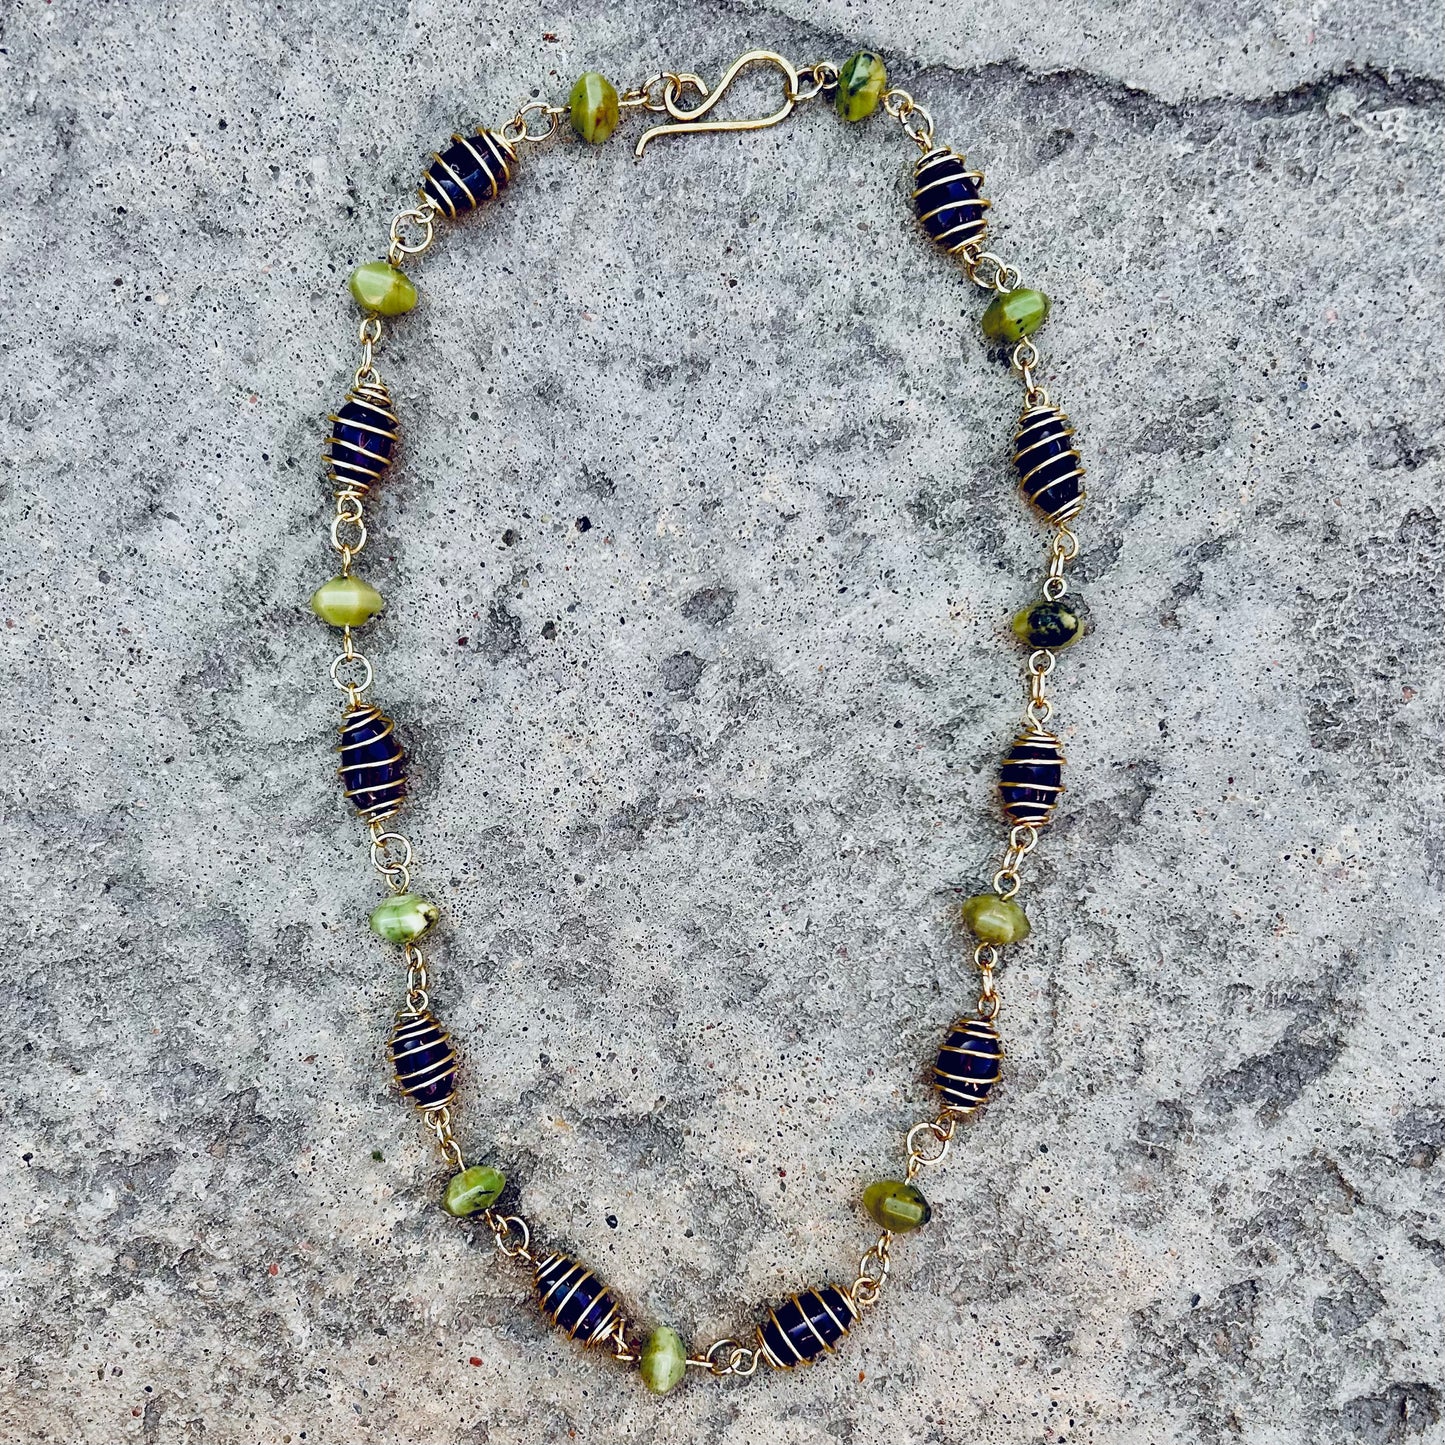 Amethyst and Serpentine Harmony Necklace